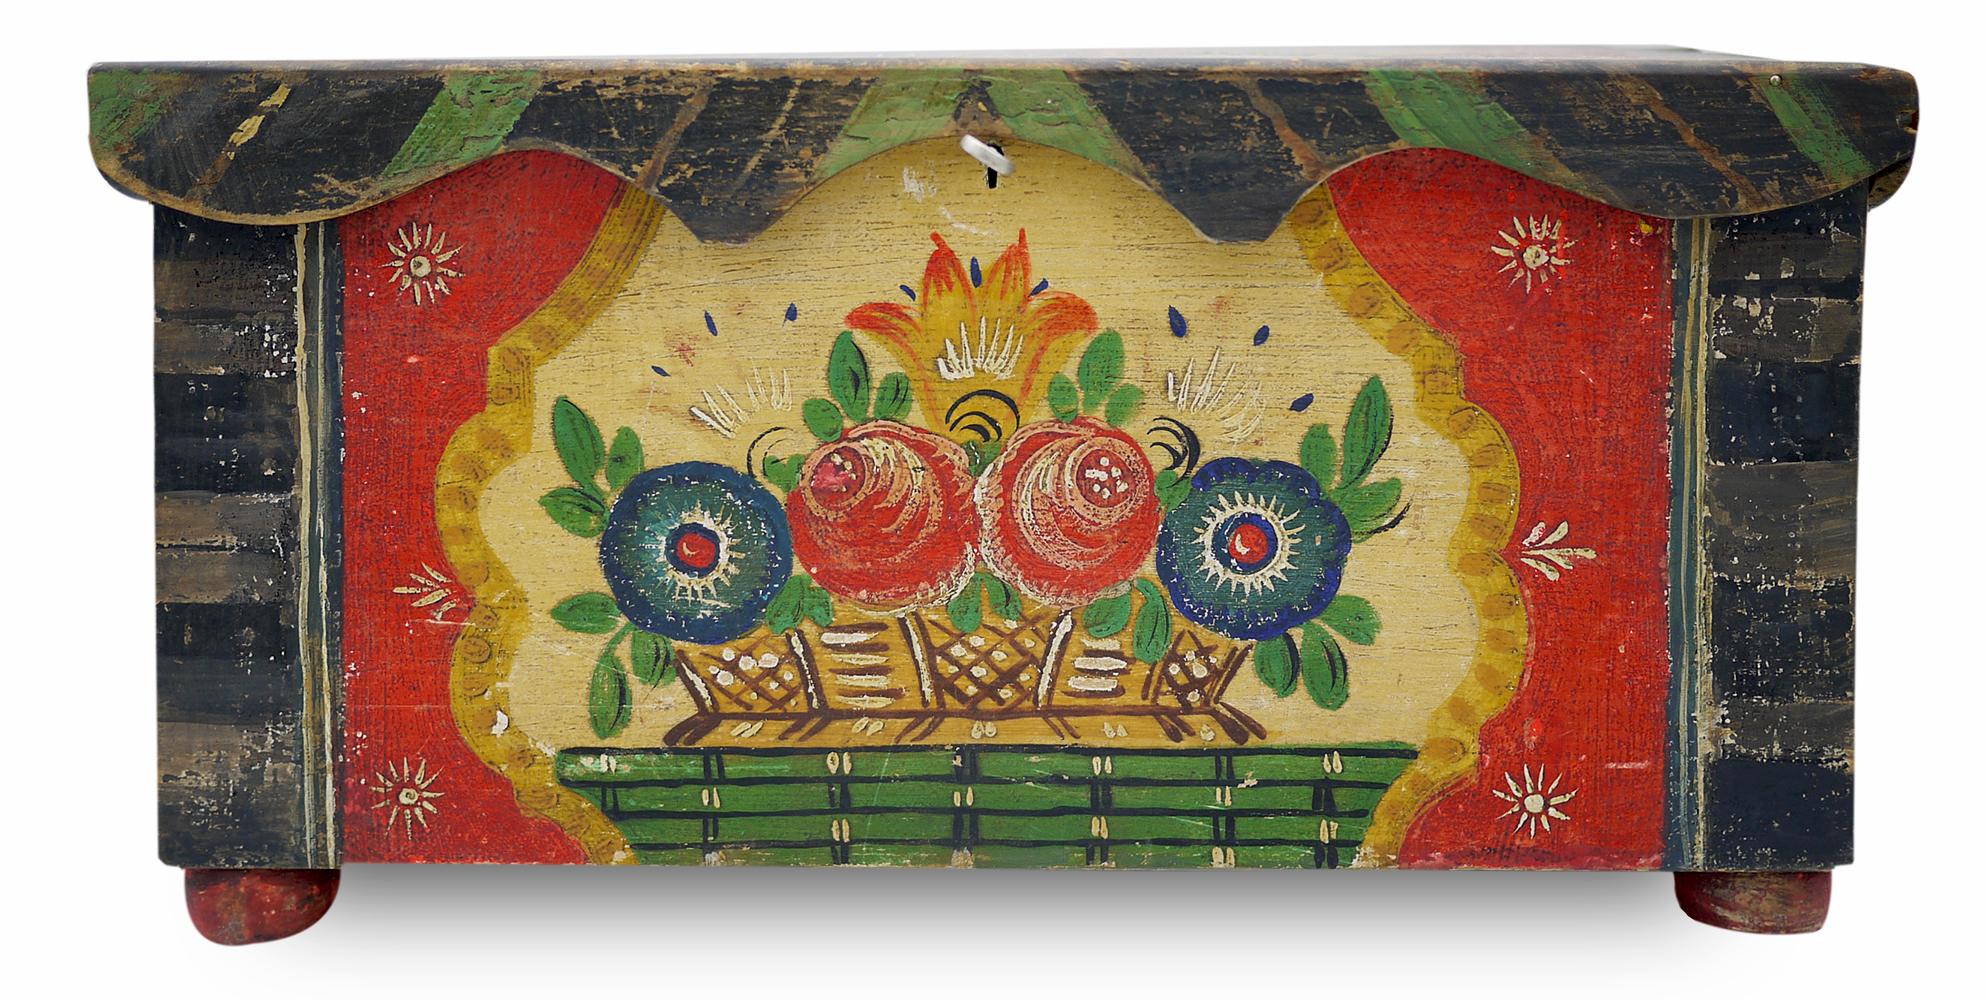 Folk Art Painted Wooden Box, Early 20th Century